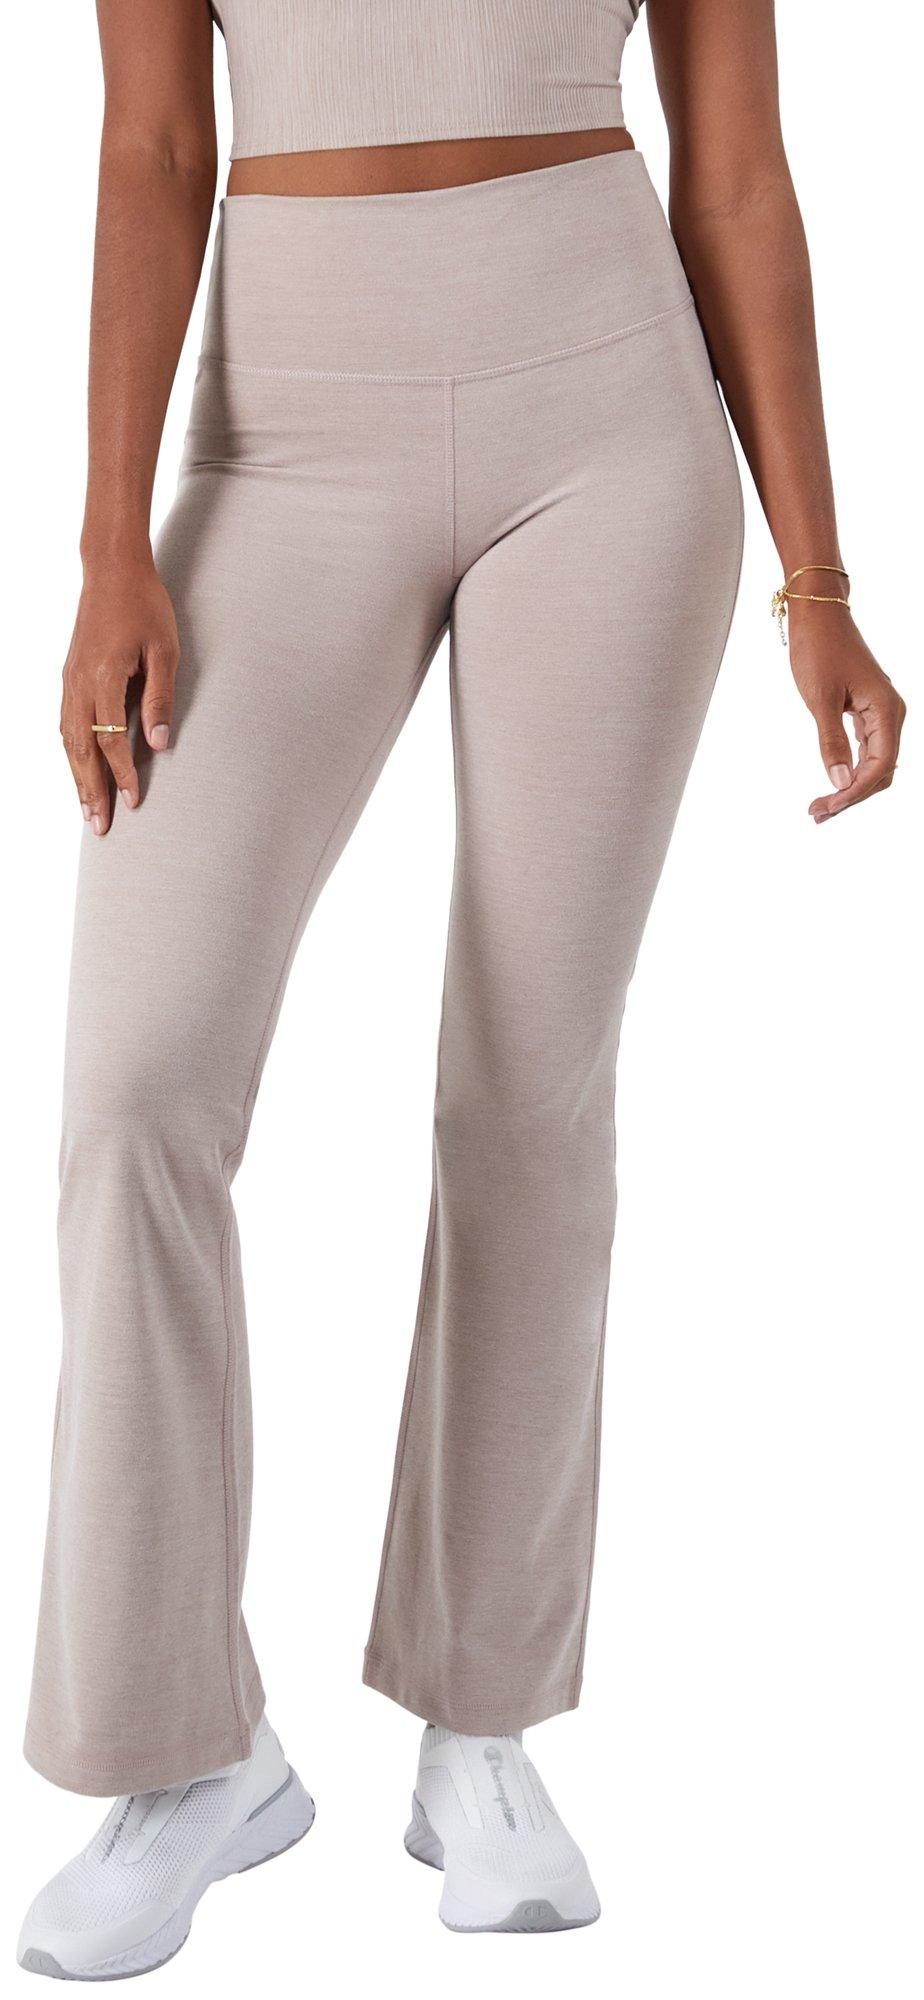 Women's Flare Pants for sale in Port Laudania, Florida